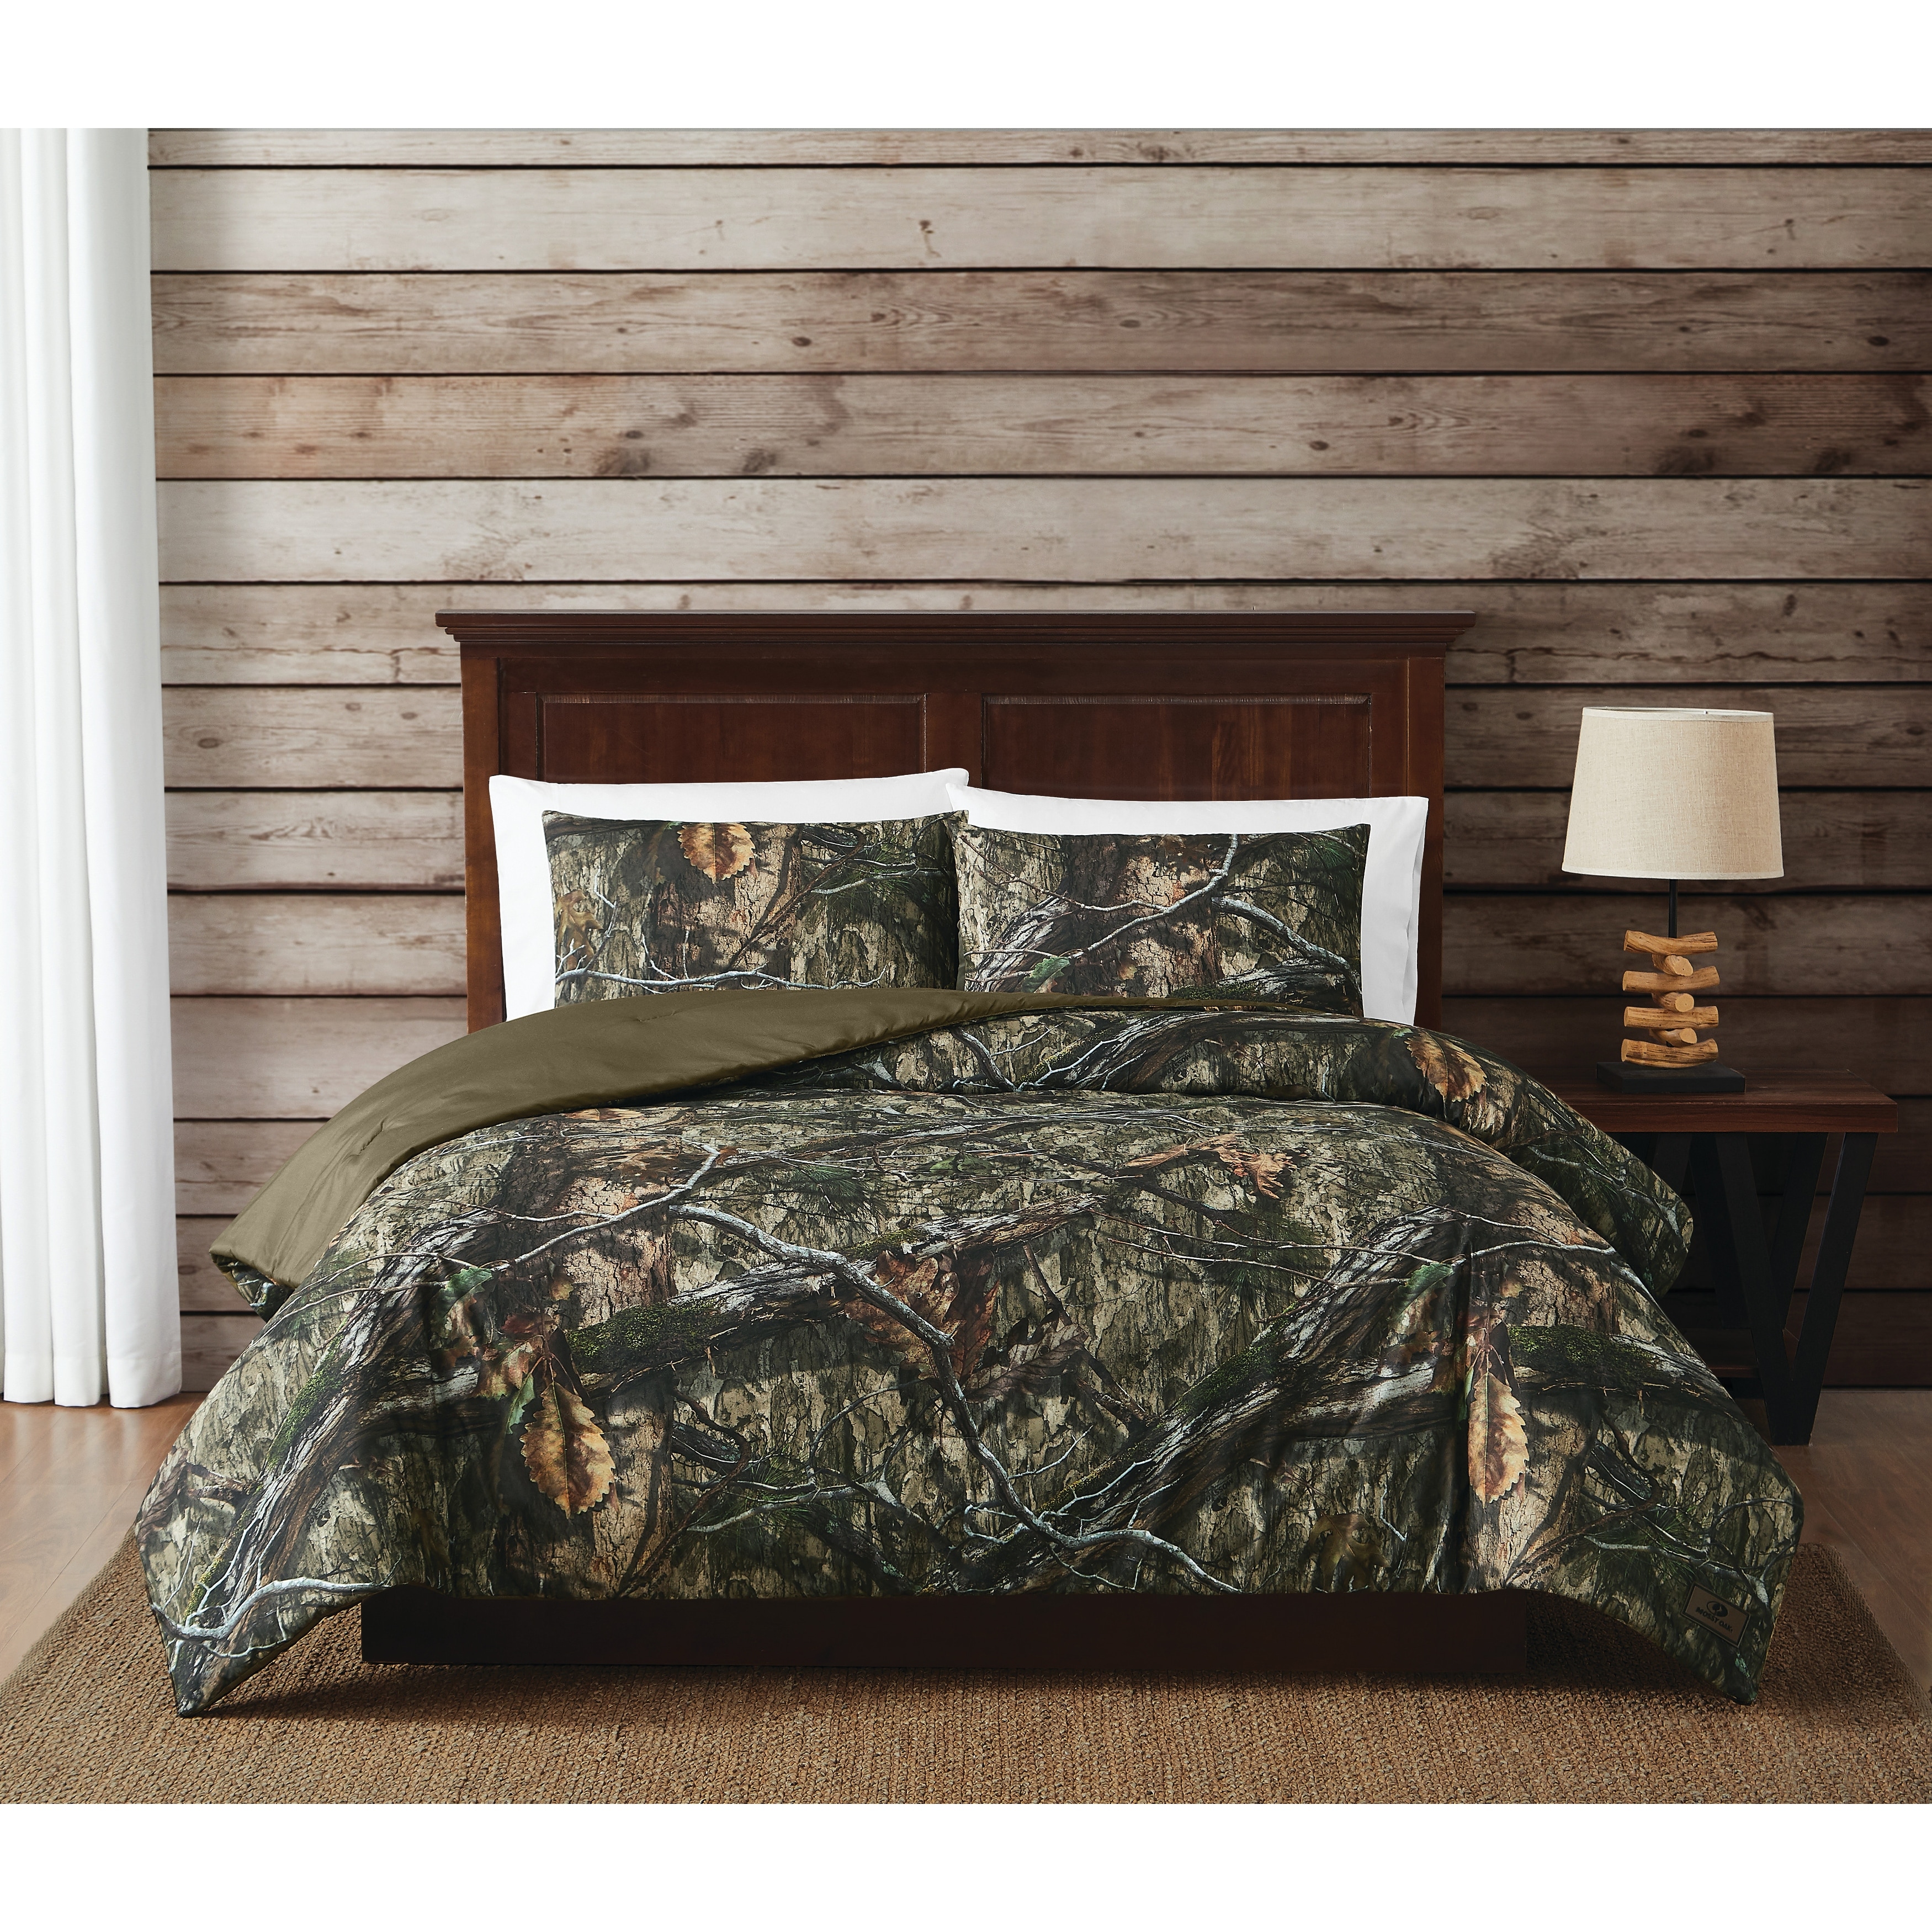 https://ak1.ostkcdn.com/images/products/is/images/direct/79668aad5401daf6e2e127ce6a4d2daf60aa7443/Mossy-Oak-Country-DNA-Comforter-Set.jpg